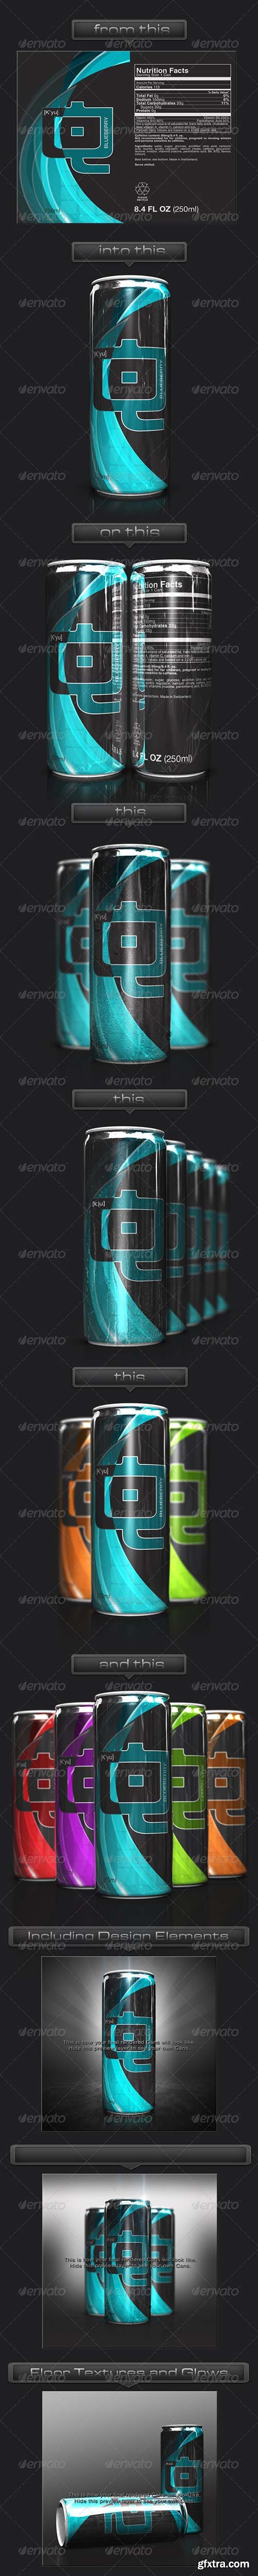 GraphicRiver - 3D Energy Drink Soda Can Mockup 3526465